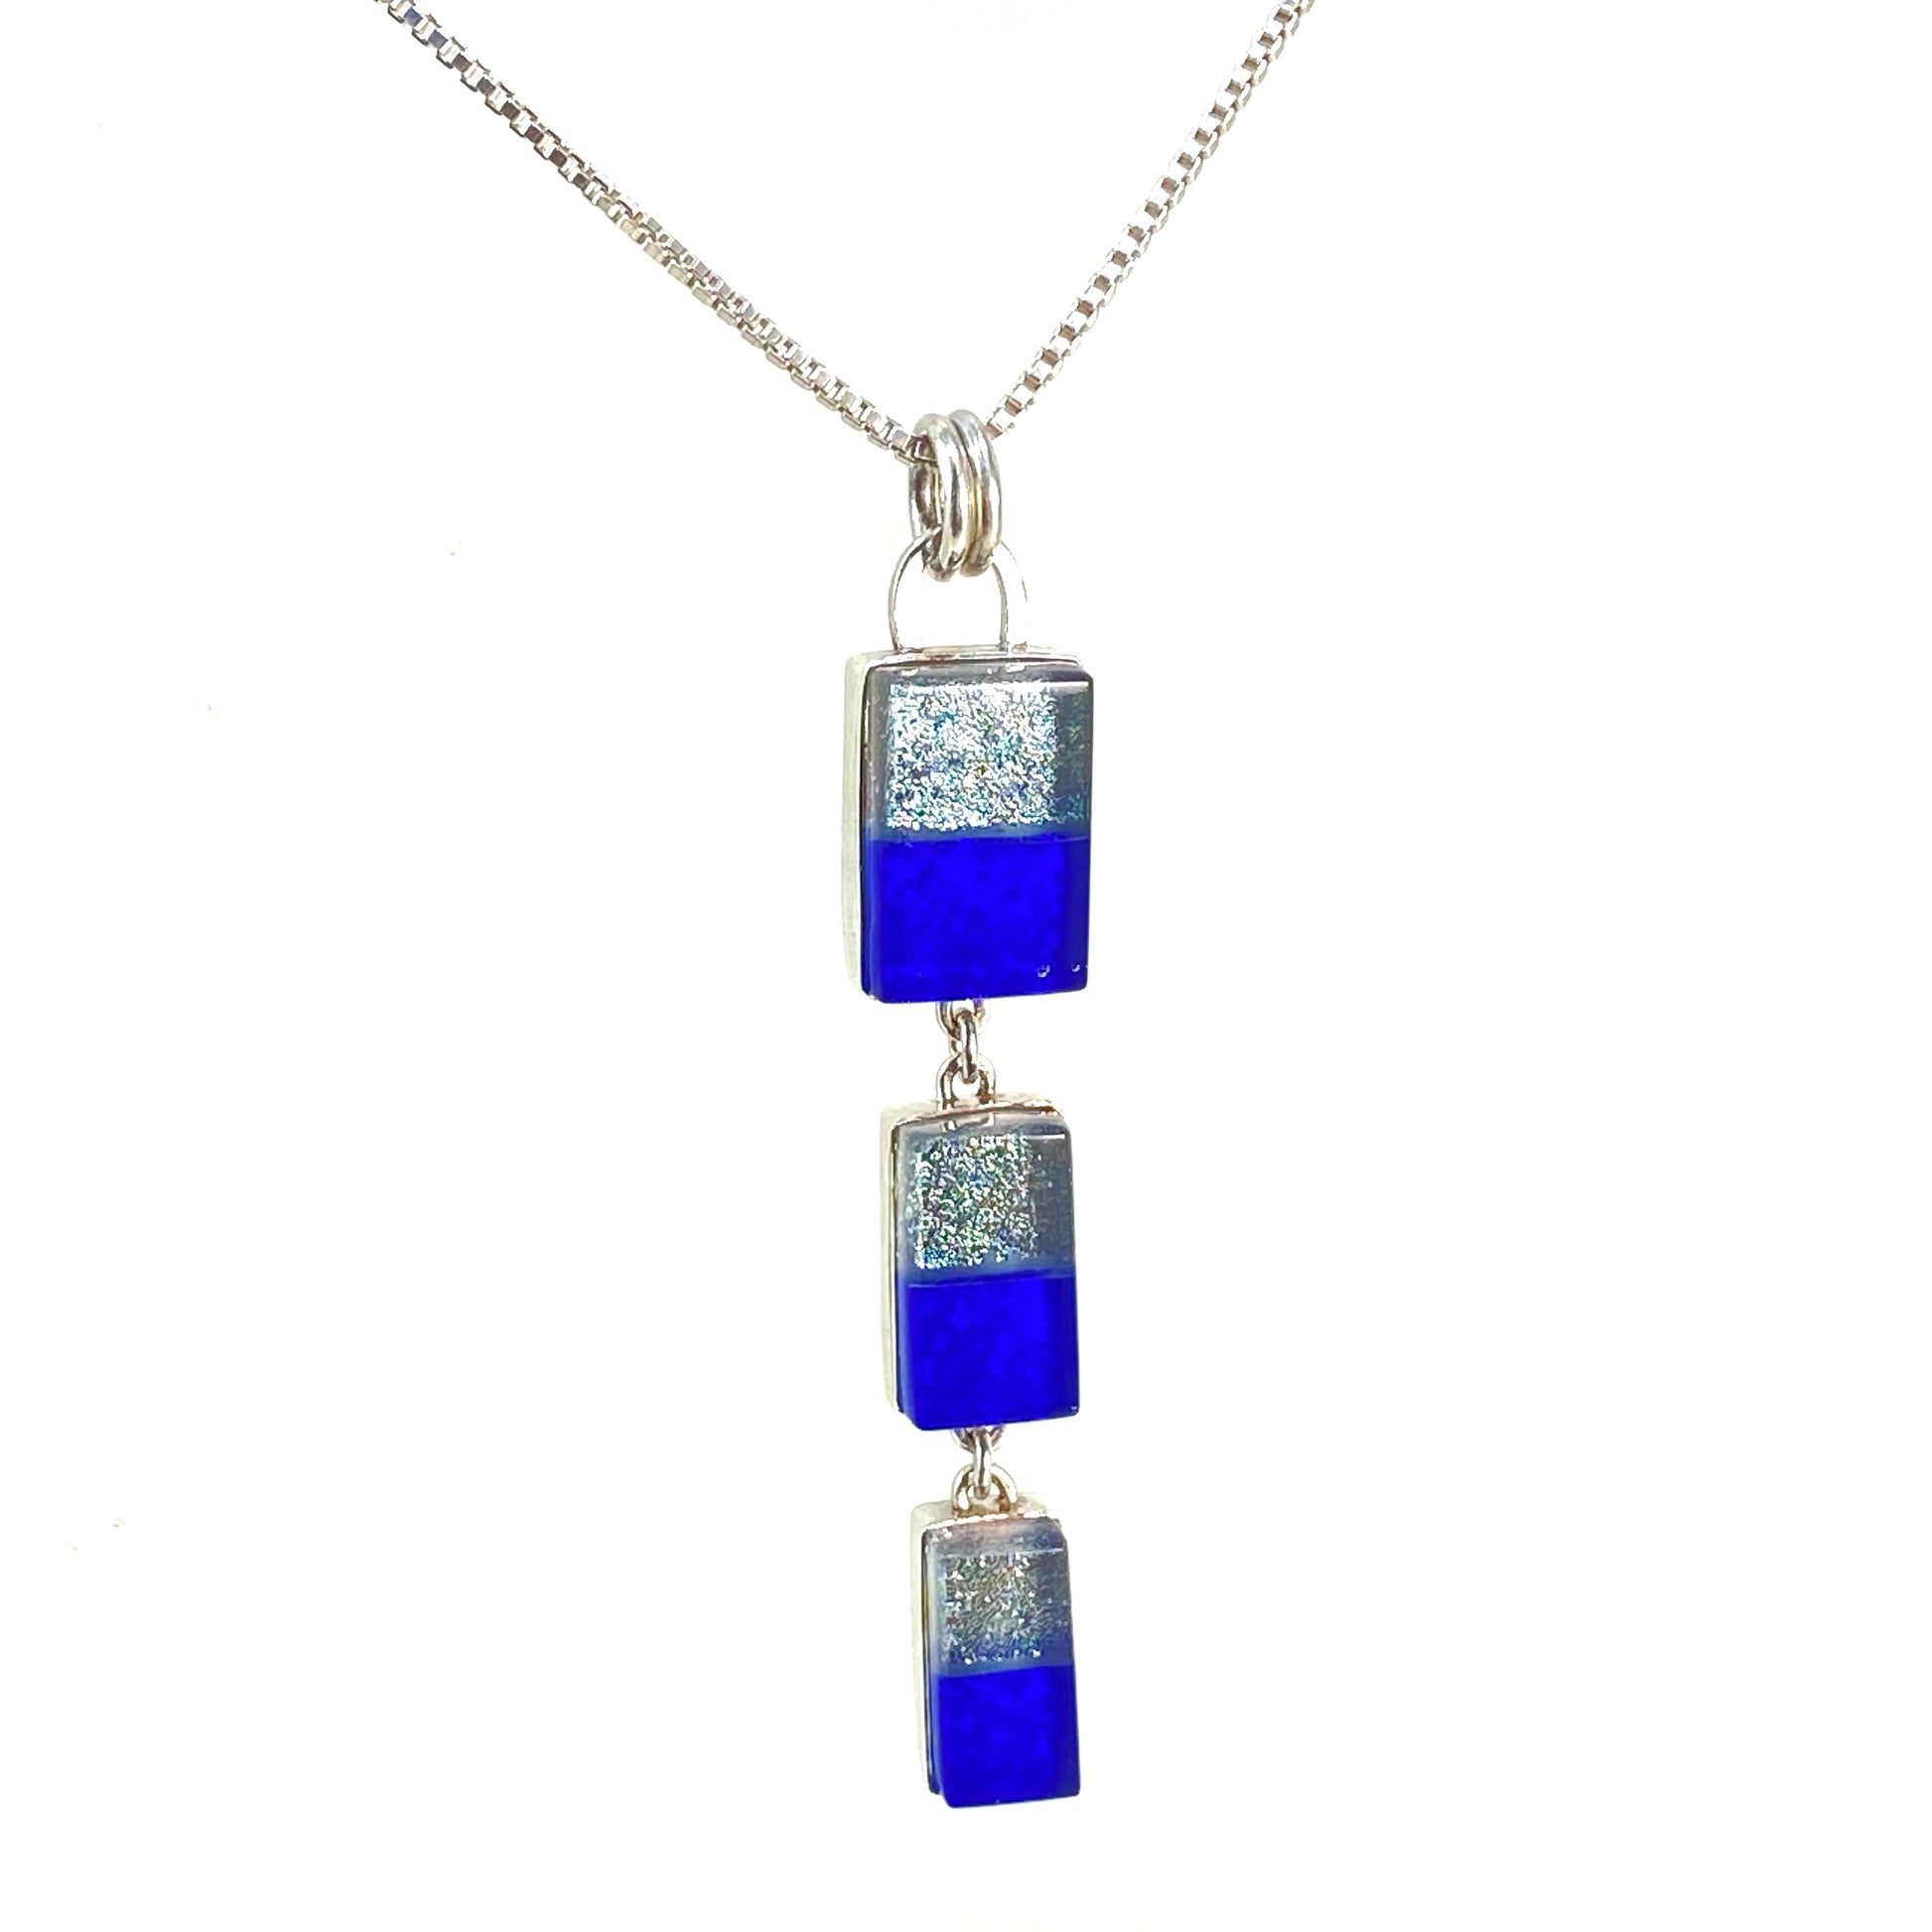 Triple drop rectangle necklace in platinum gray and cobalt blue glass, fused glass, glass jewelry, glass and silver jewelry, handmade, handcrafted, American Craft, hand fabricated jewelry, hand fabricated jewellery, Athen, Georgia, colorful jewelry, sparkle, bullseye glass, dichroic glass, art jewelry